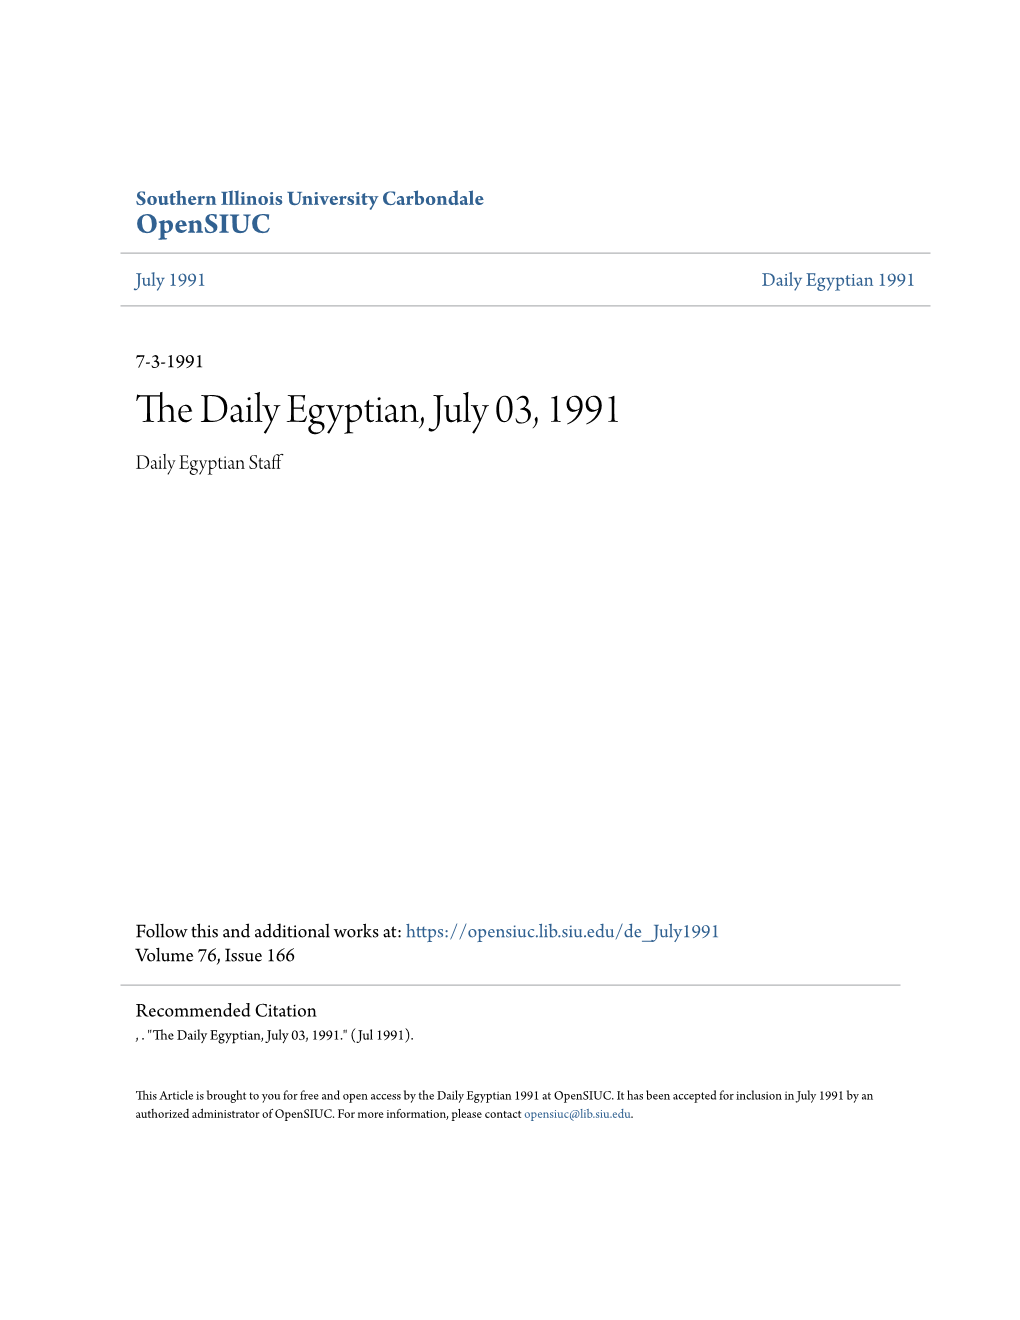 The Daily Egyptian, July 03, 1991